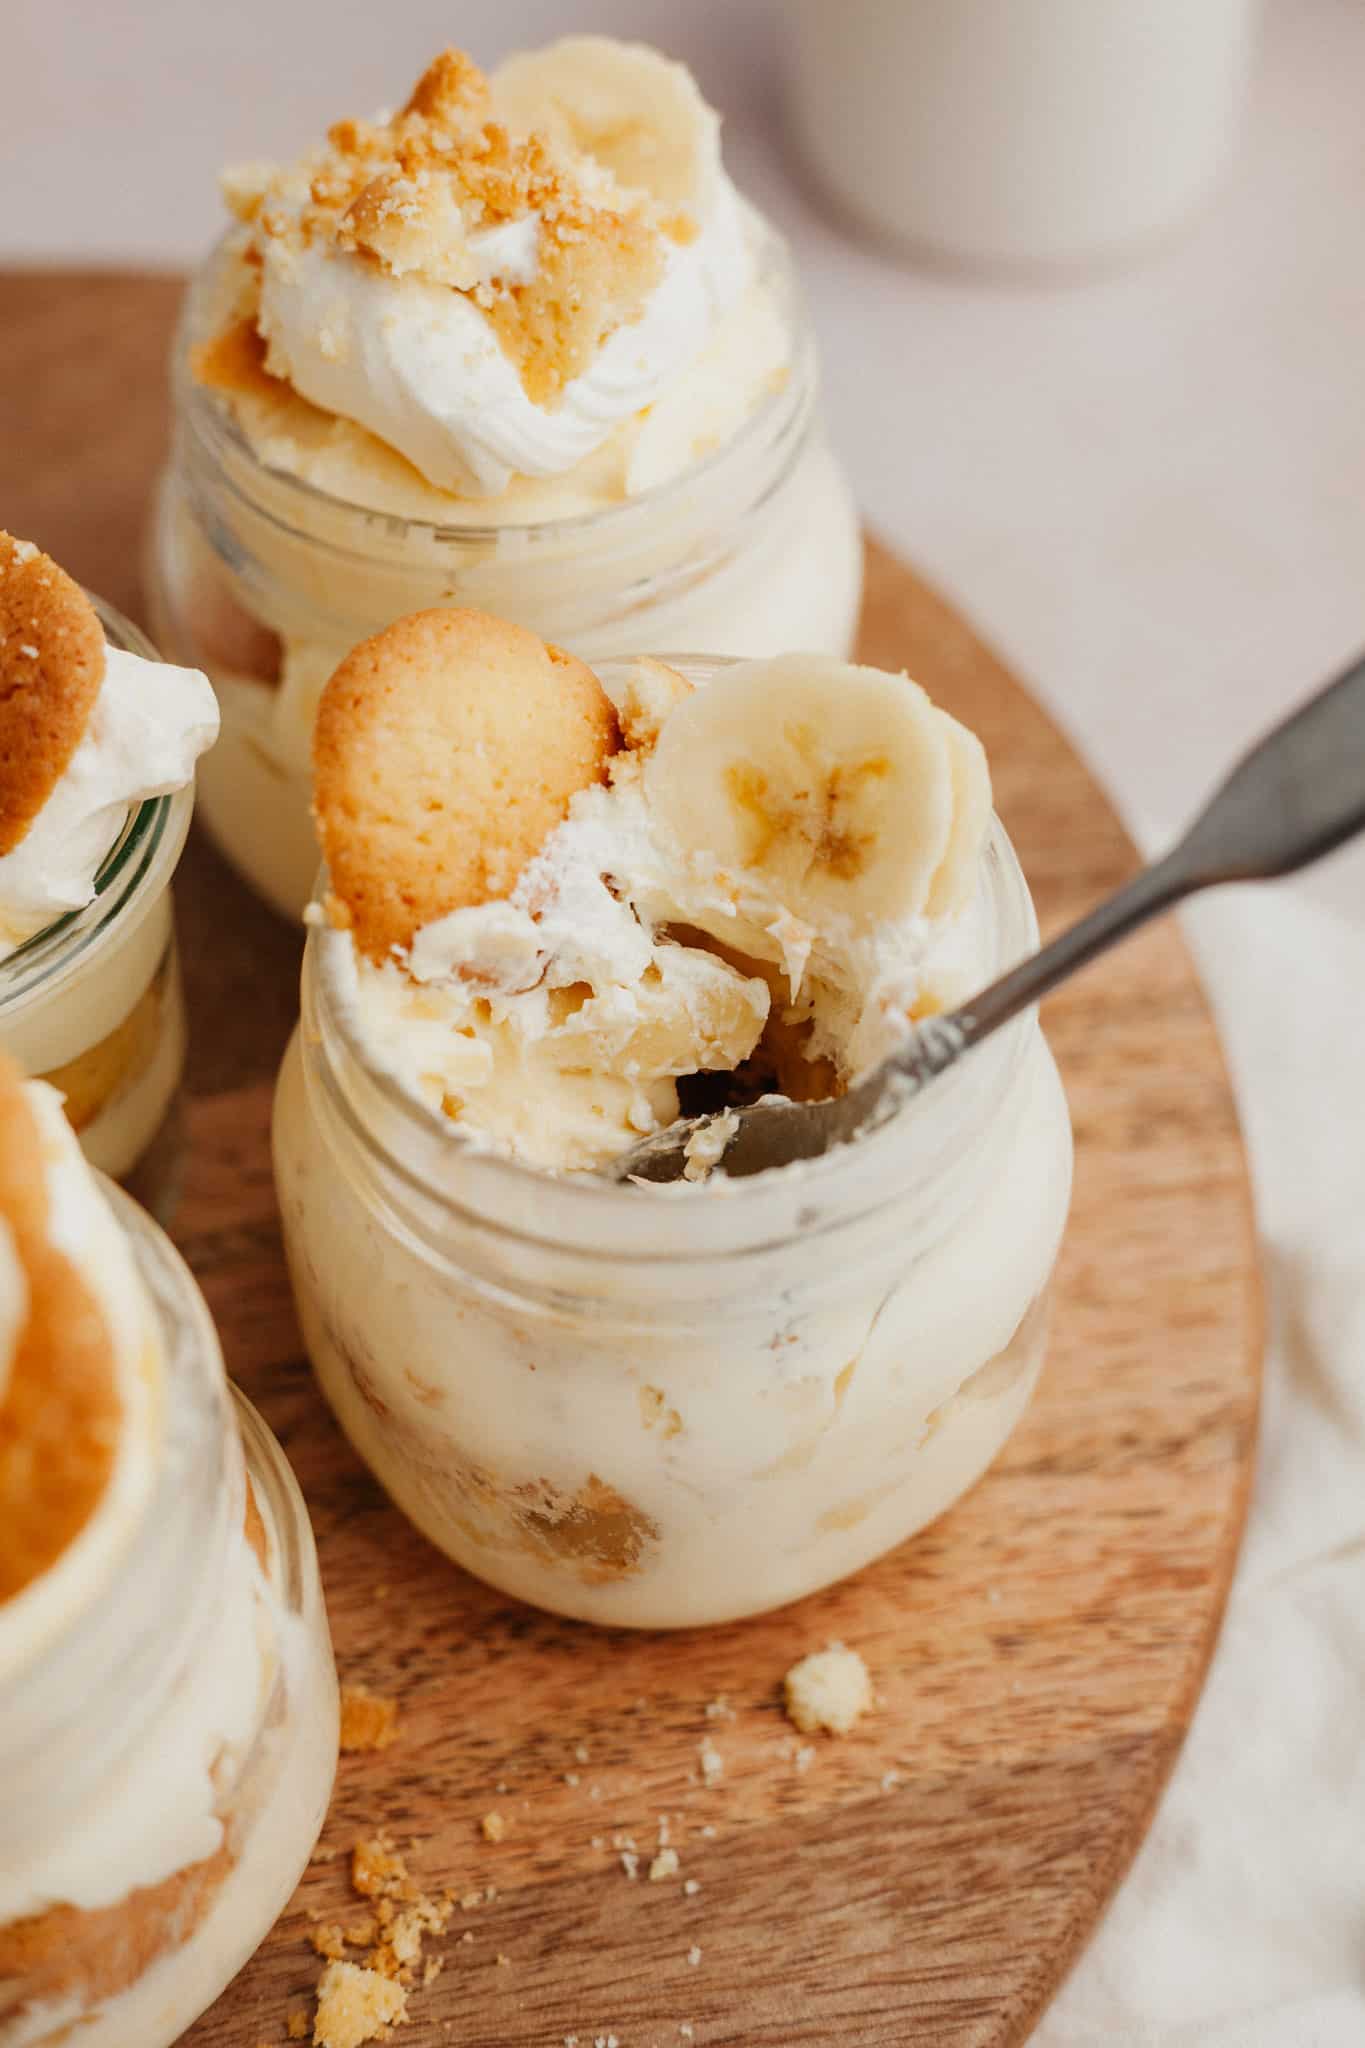 Banana pudding in a jar on a wooden board. There is a spoon in the jar